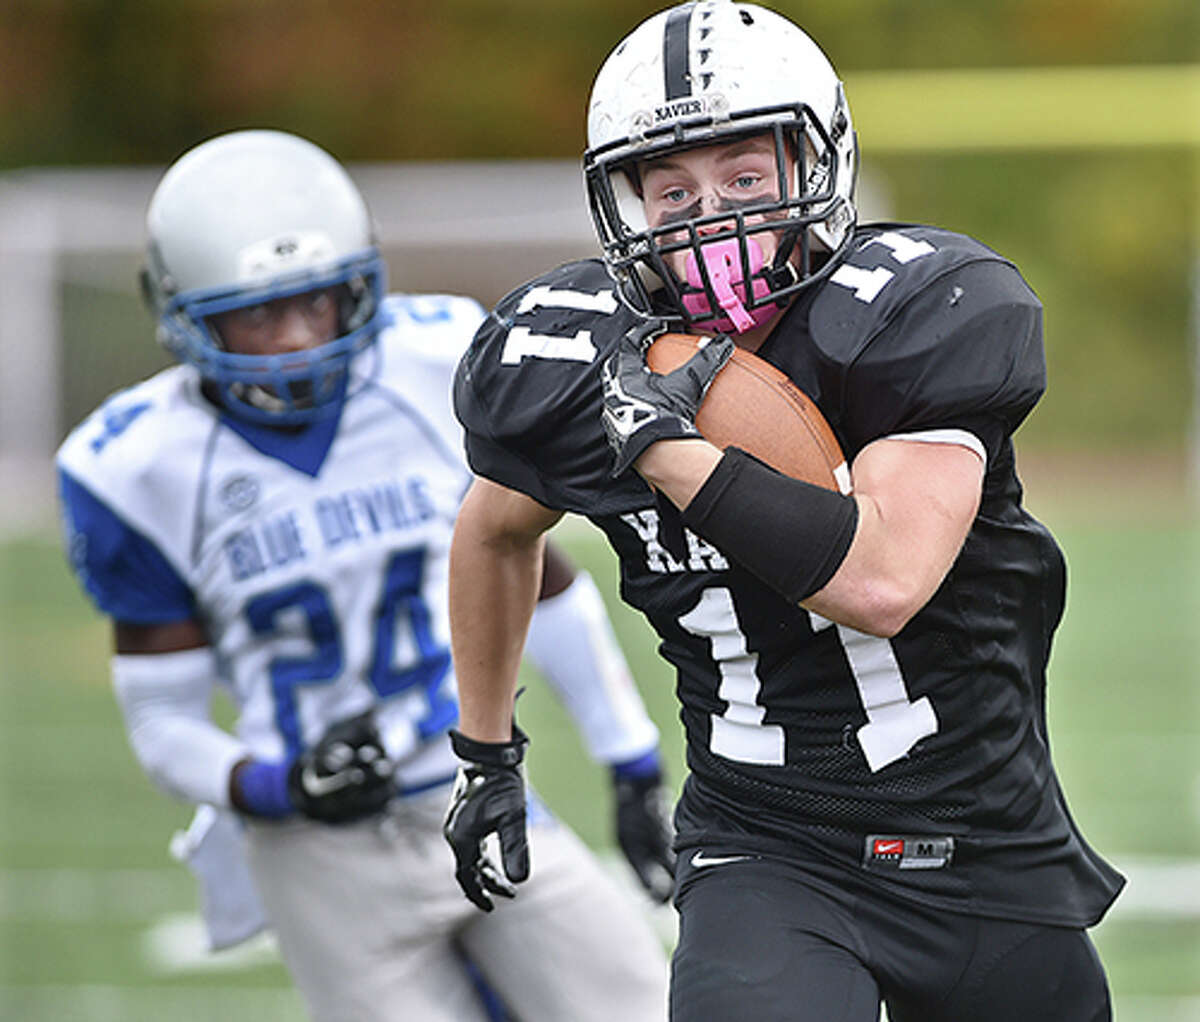 Xavier’s Robert Baldo runs for a touchdown in the fourth quarter as West Haven’s Drew Highsmith defend Saturday afternoon, October 18, 2014 at the newly dedicated Larry McHugh Field at Xavier High School in Middletown. The Xavier Falcons defeated the West Haven Blue Devils 27 -7. (Catherine Avalone – New Haven Register)